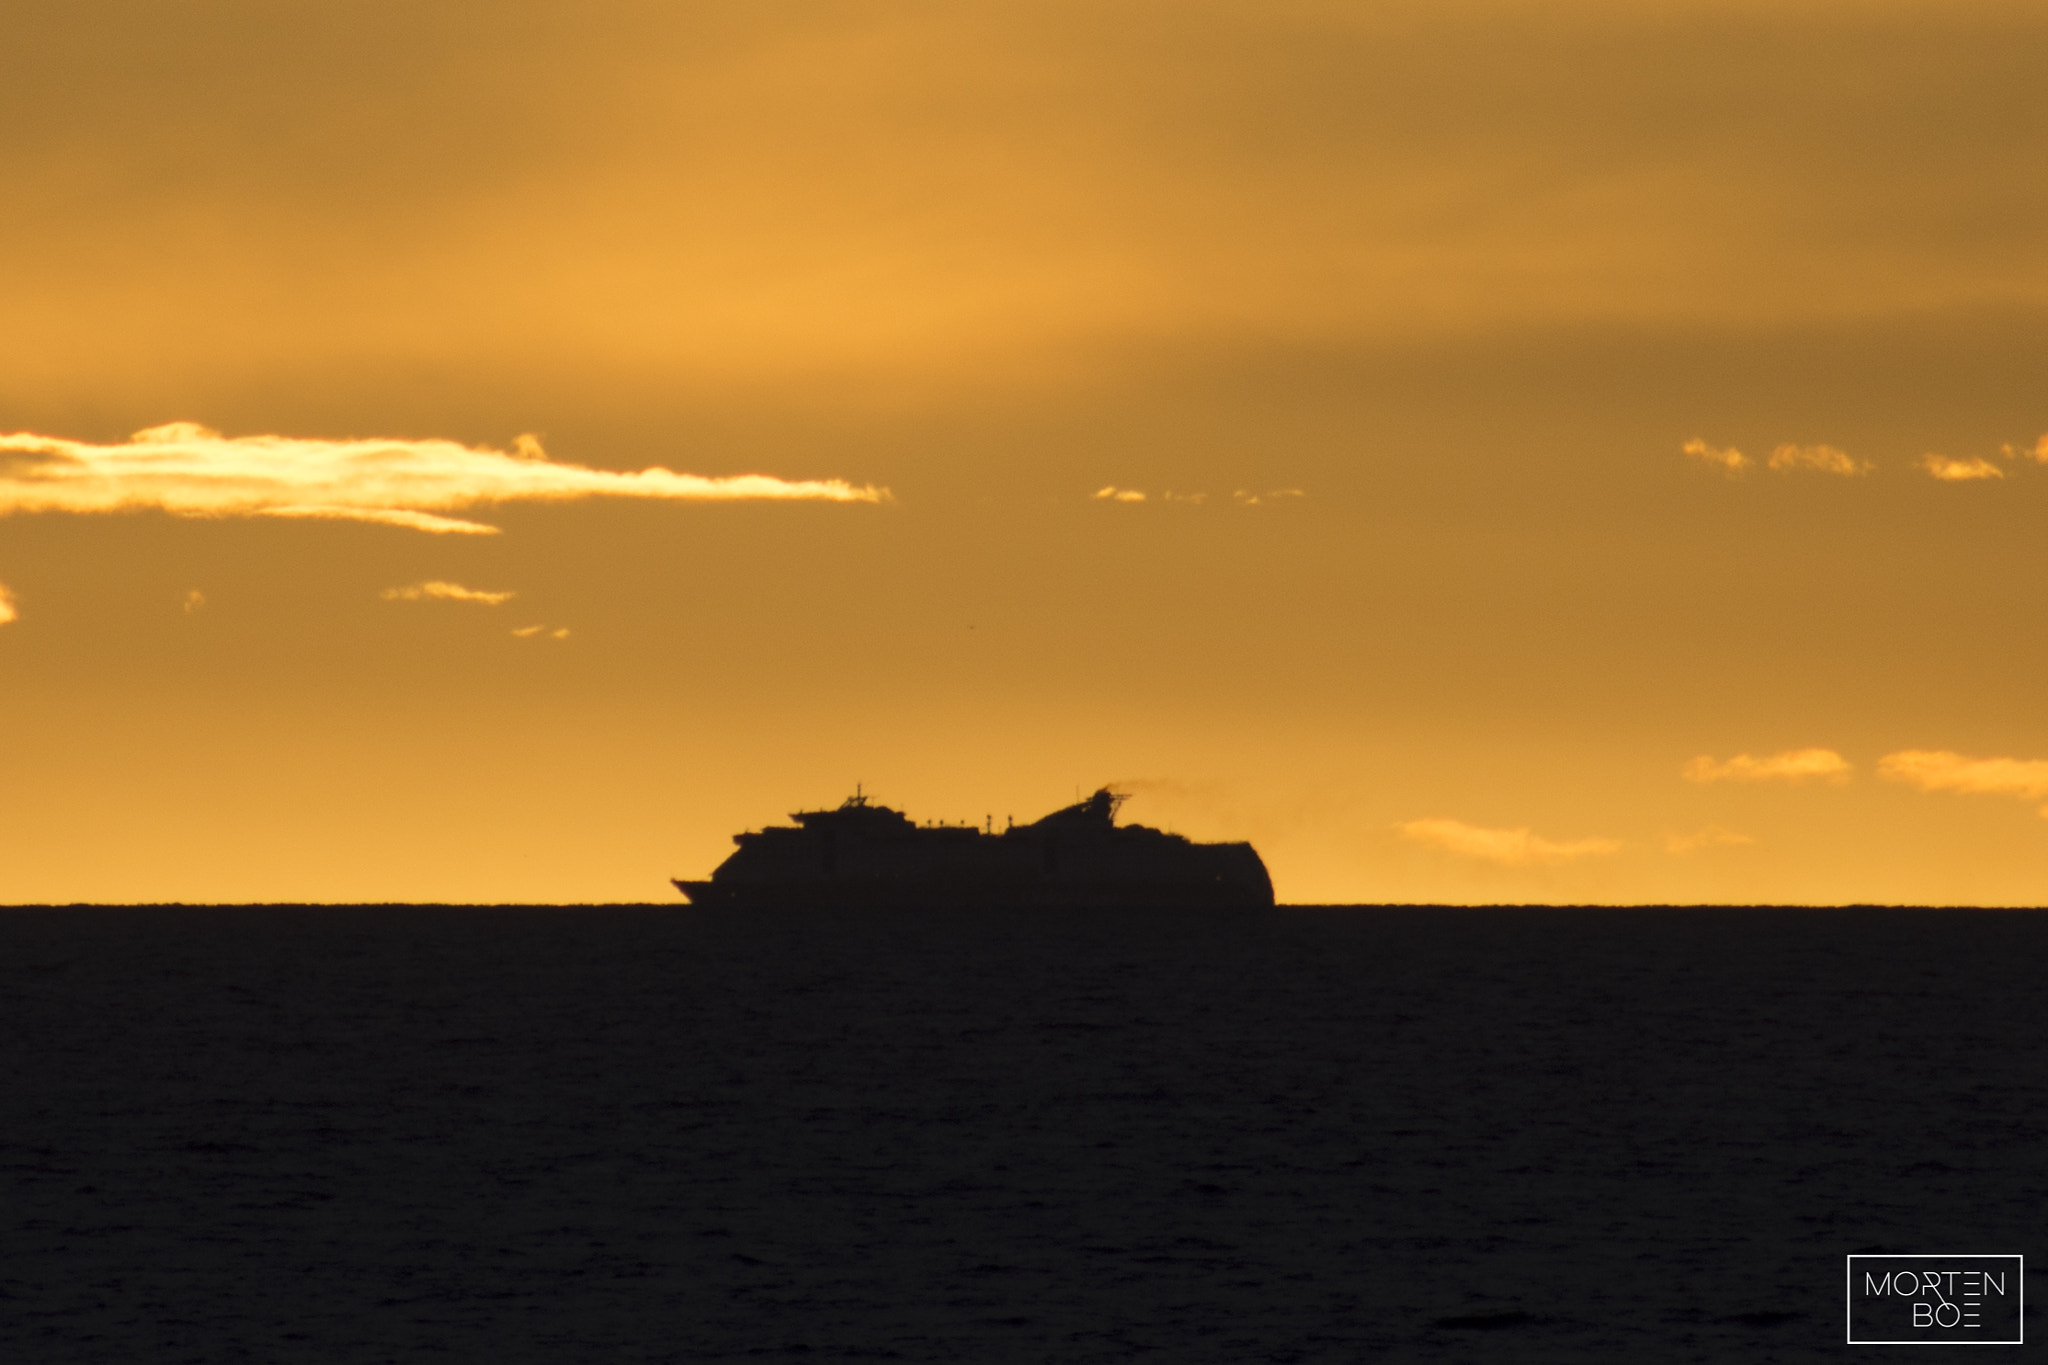 Nikon D7200 + Sigma 70-300mm F4-5.6 APO DG Macro sample photo. A nice silhouette of the cruise ship m/s color fantasy departing norway on 01/03/17 photography